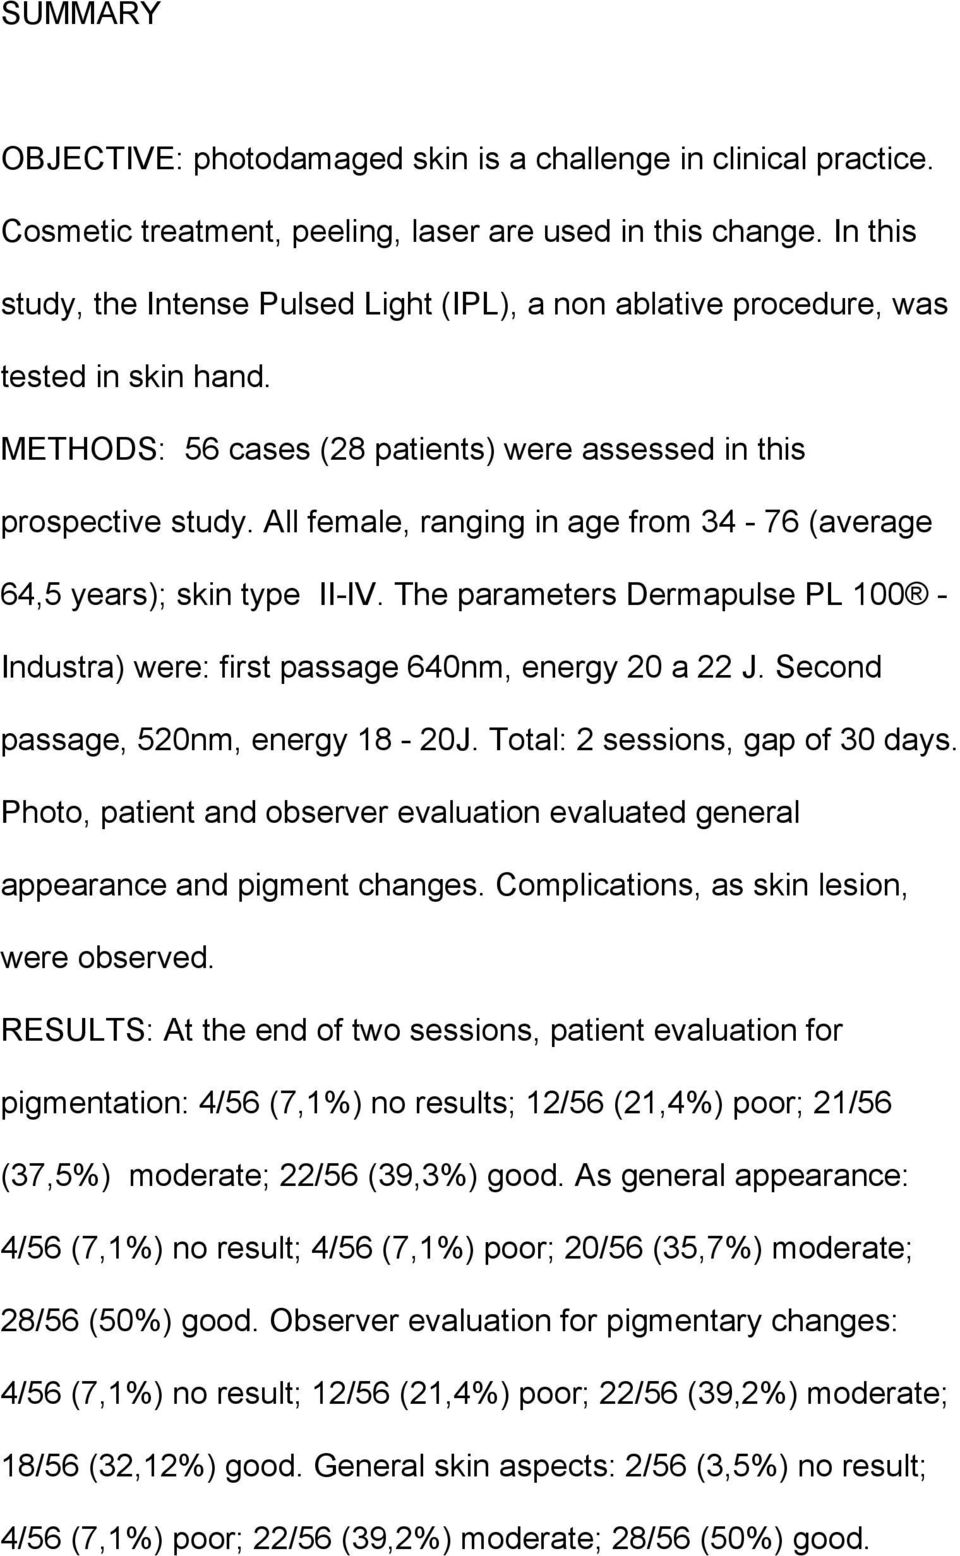 All female, ranging in age from 34-76 (average 64,5 years); skin type II-IV. The parameters Dermapulse PL 100 - Industra) were: first passage 640nm, energy 20 a 22 J.